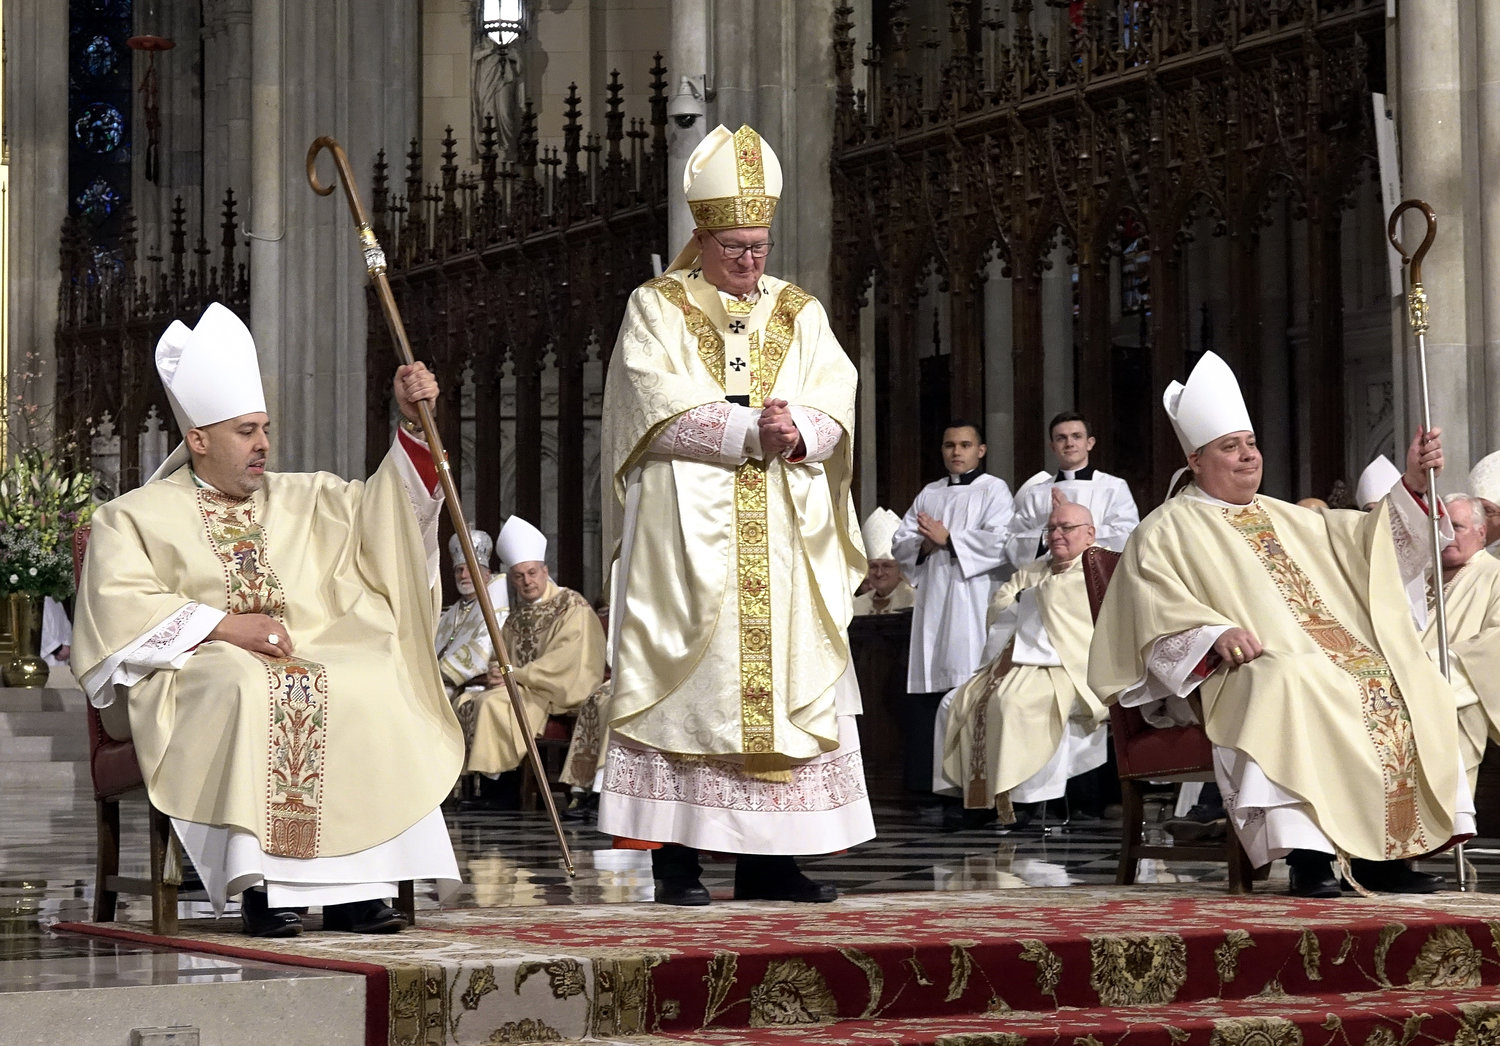 Cardinal Dolan stands between his newly ordained auxiliary bishops as both hold their new crosiers.